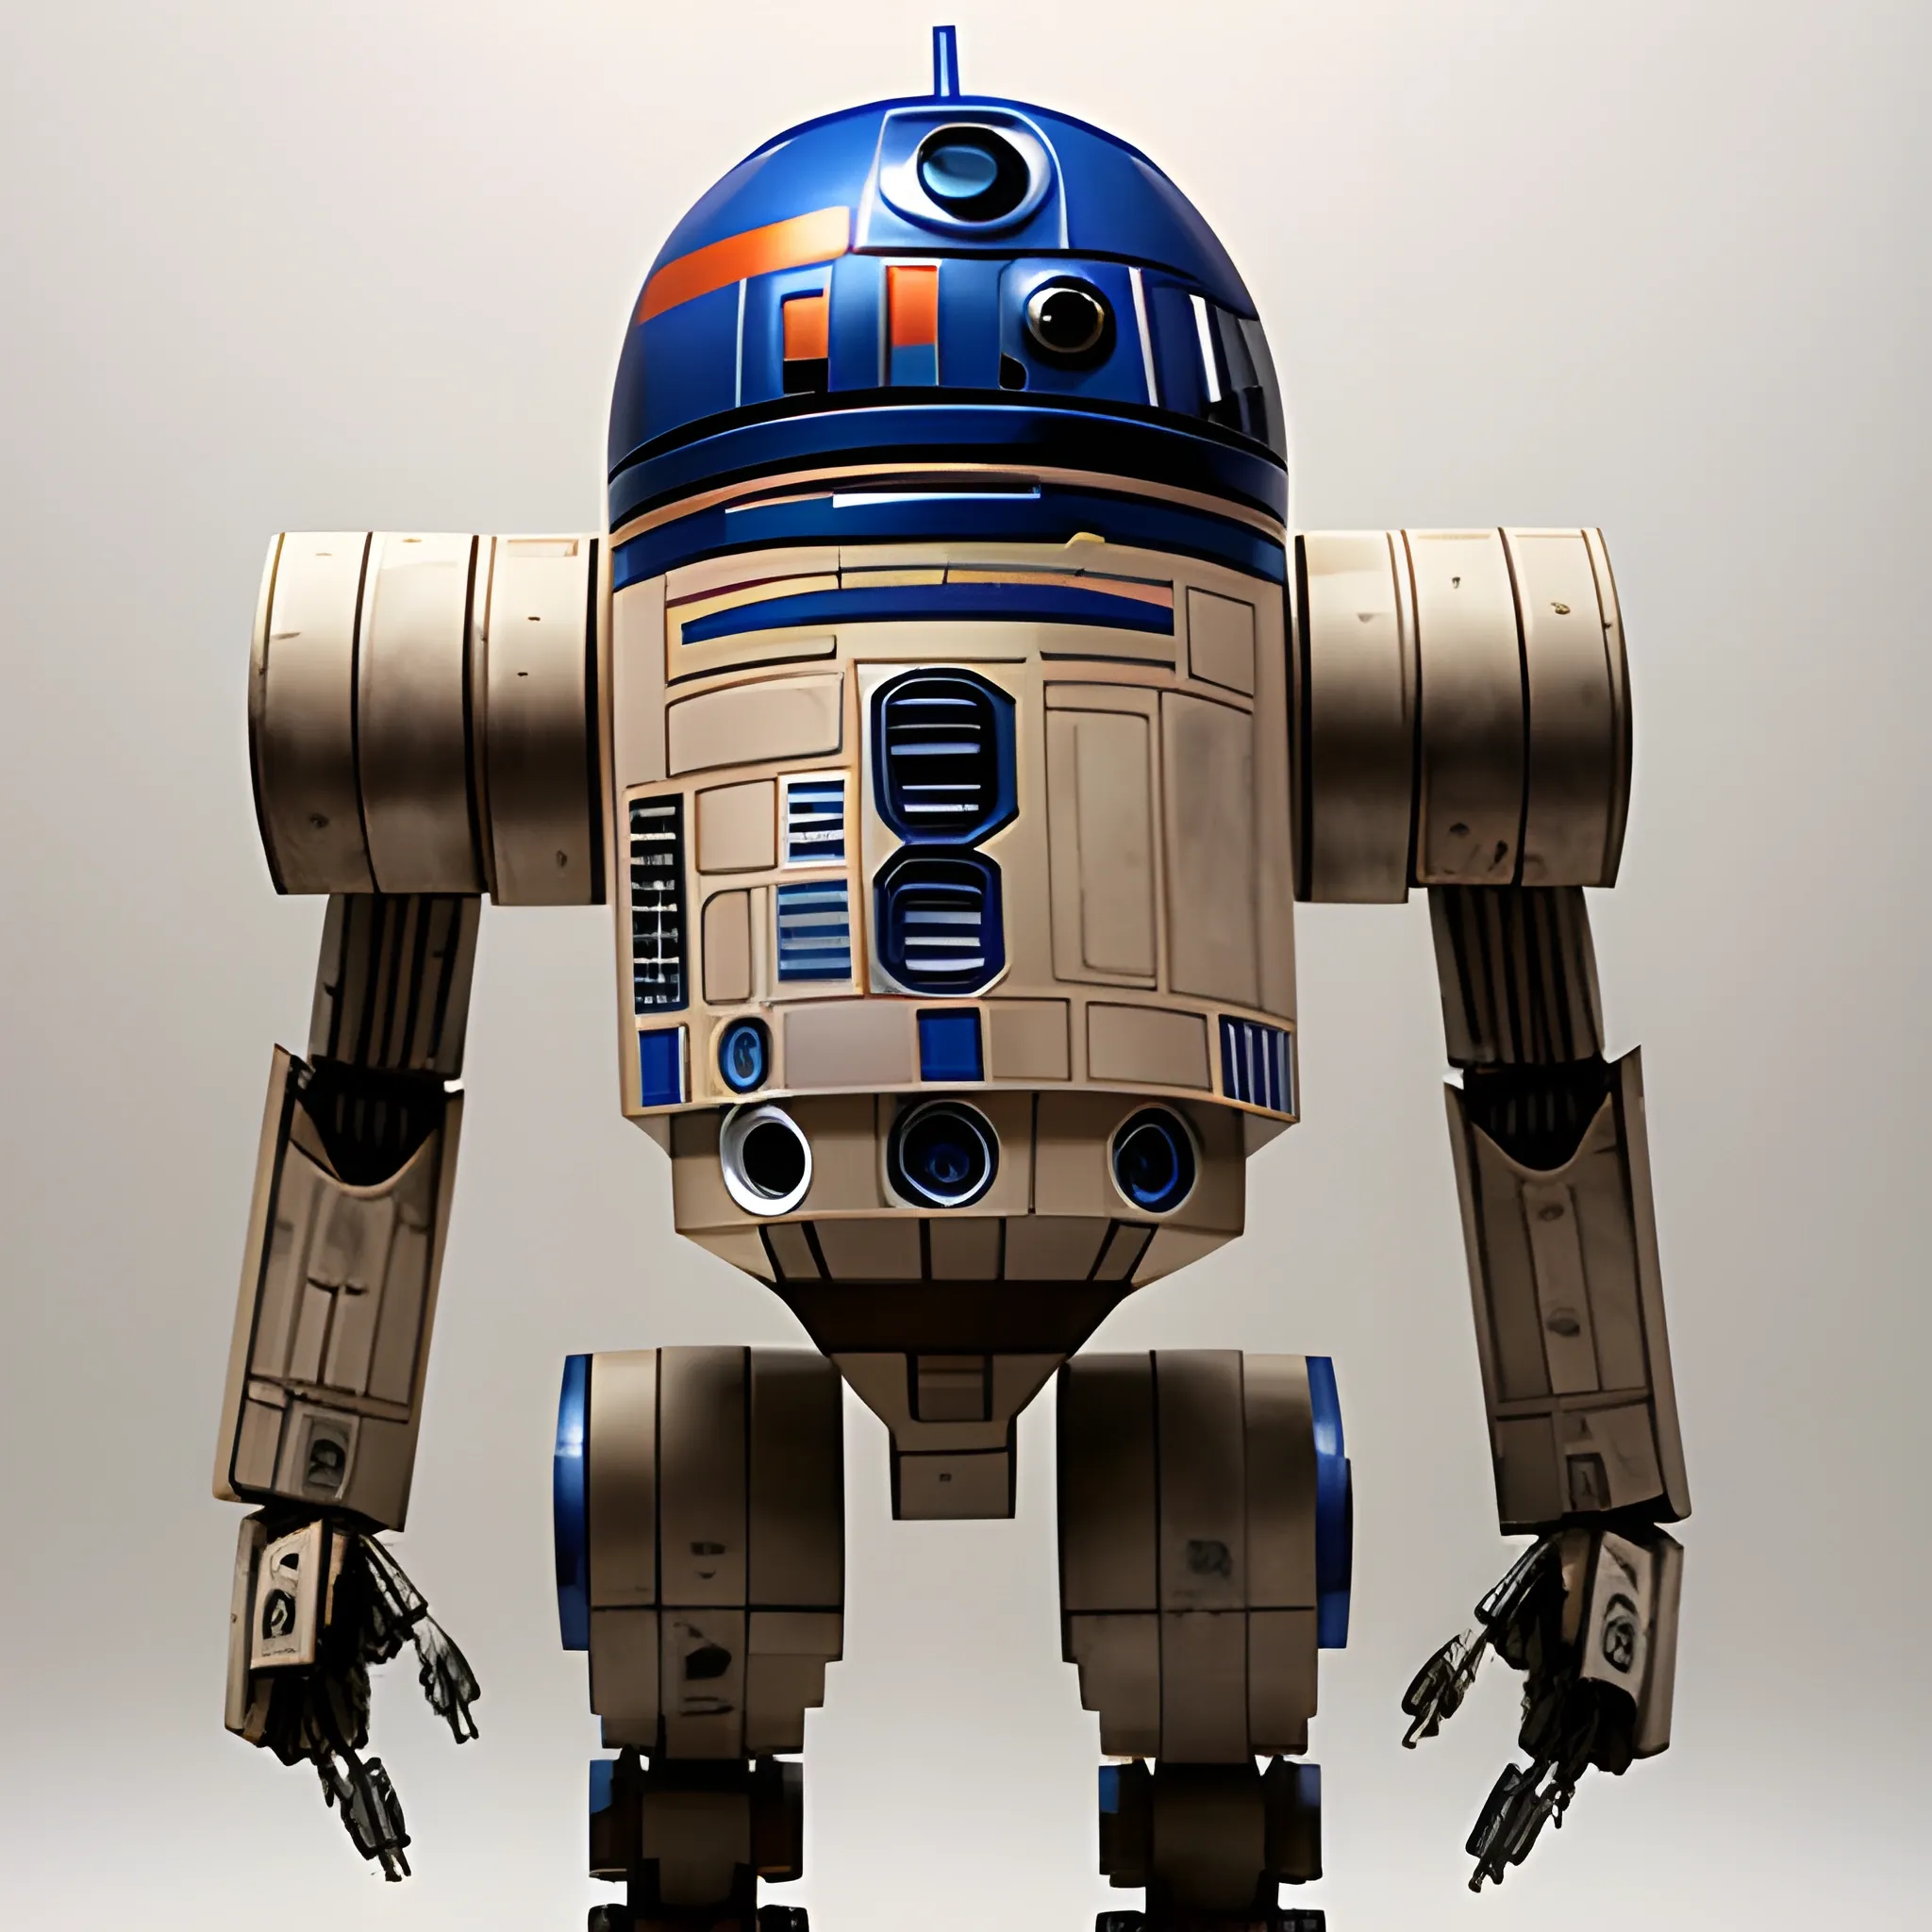 a full body star wars droid with the build and body of a super battle droid, with the head of a droid, and limbs of a protocol droid, that looks like it wwas salvaged and put together using different parts from several different star wars droids